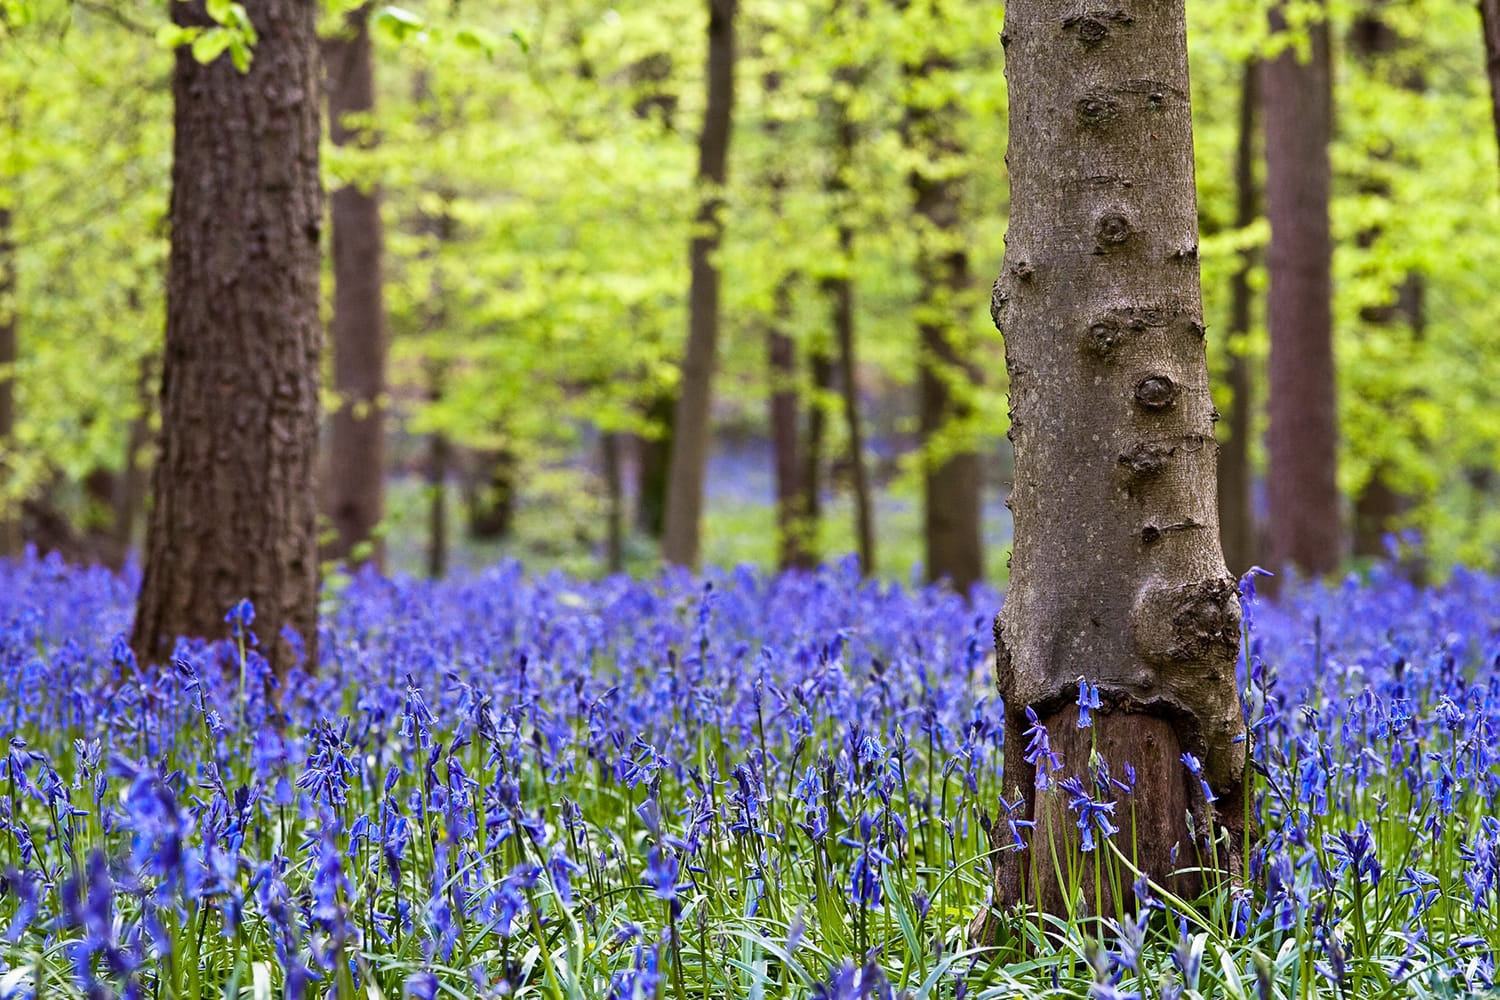 Bluebells in Whippendell Woods located in Watford, Hertfordshire, UK